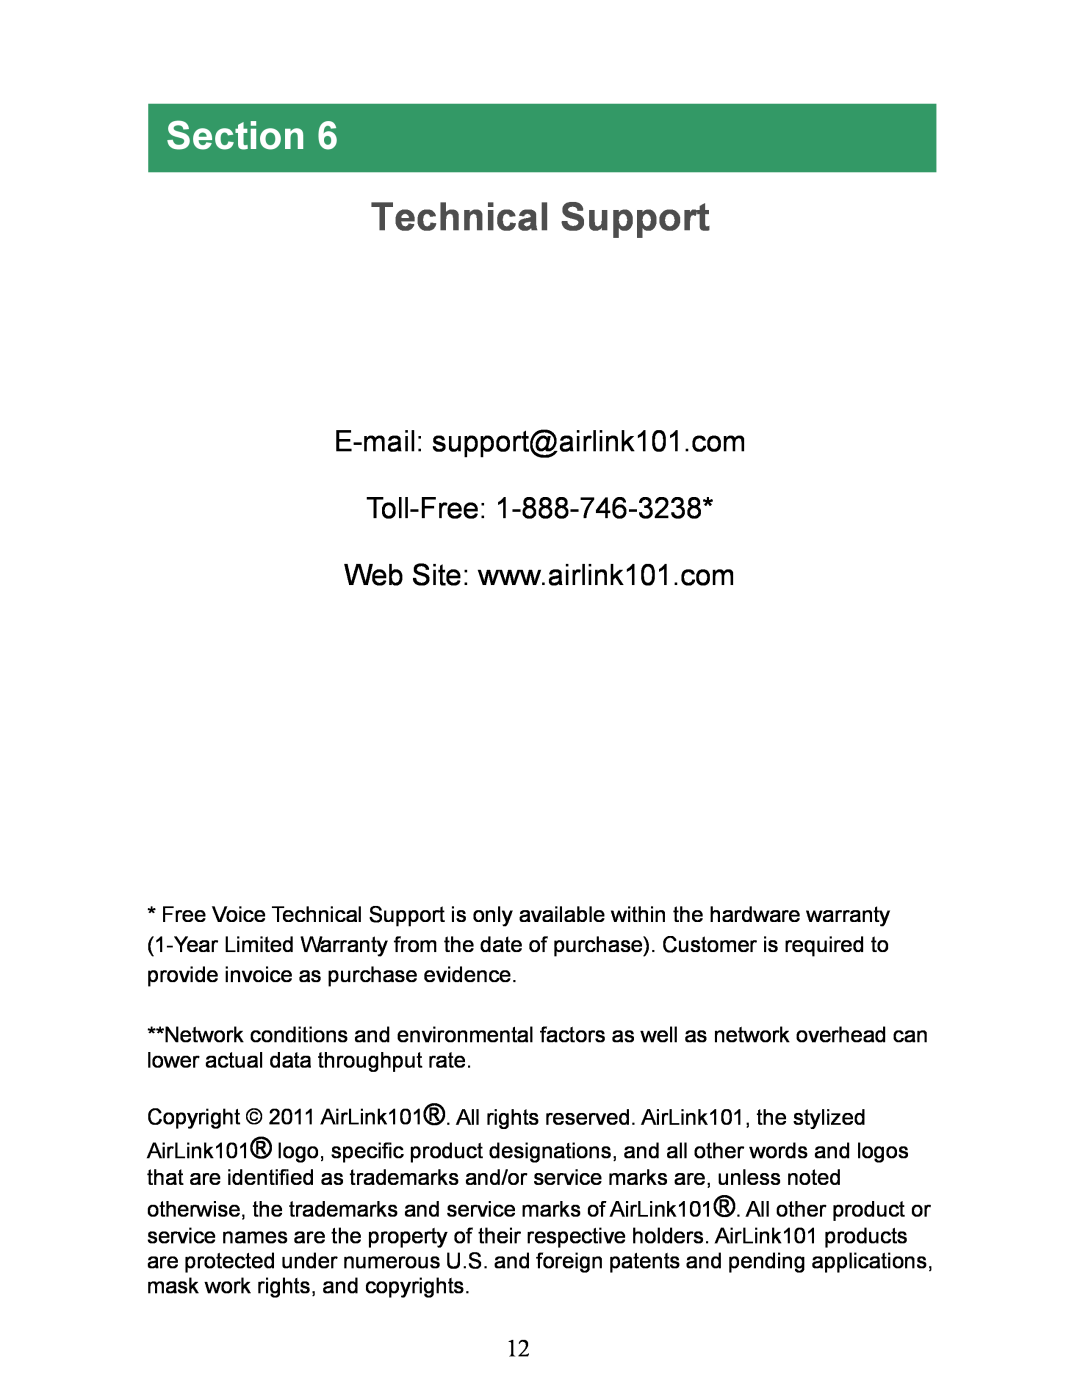 Airlink101 AGSW1600 manual Technical Support, Section, E-mail support@airlink101.com Toll-Free 